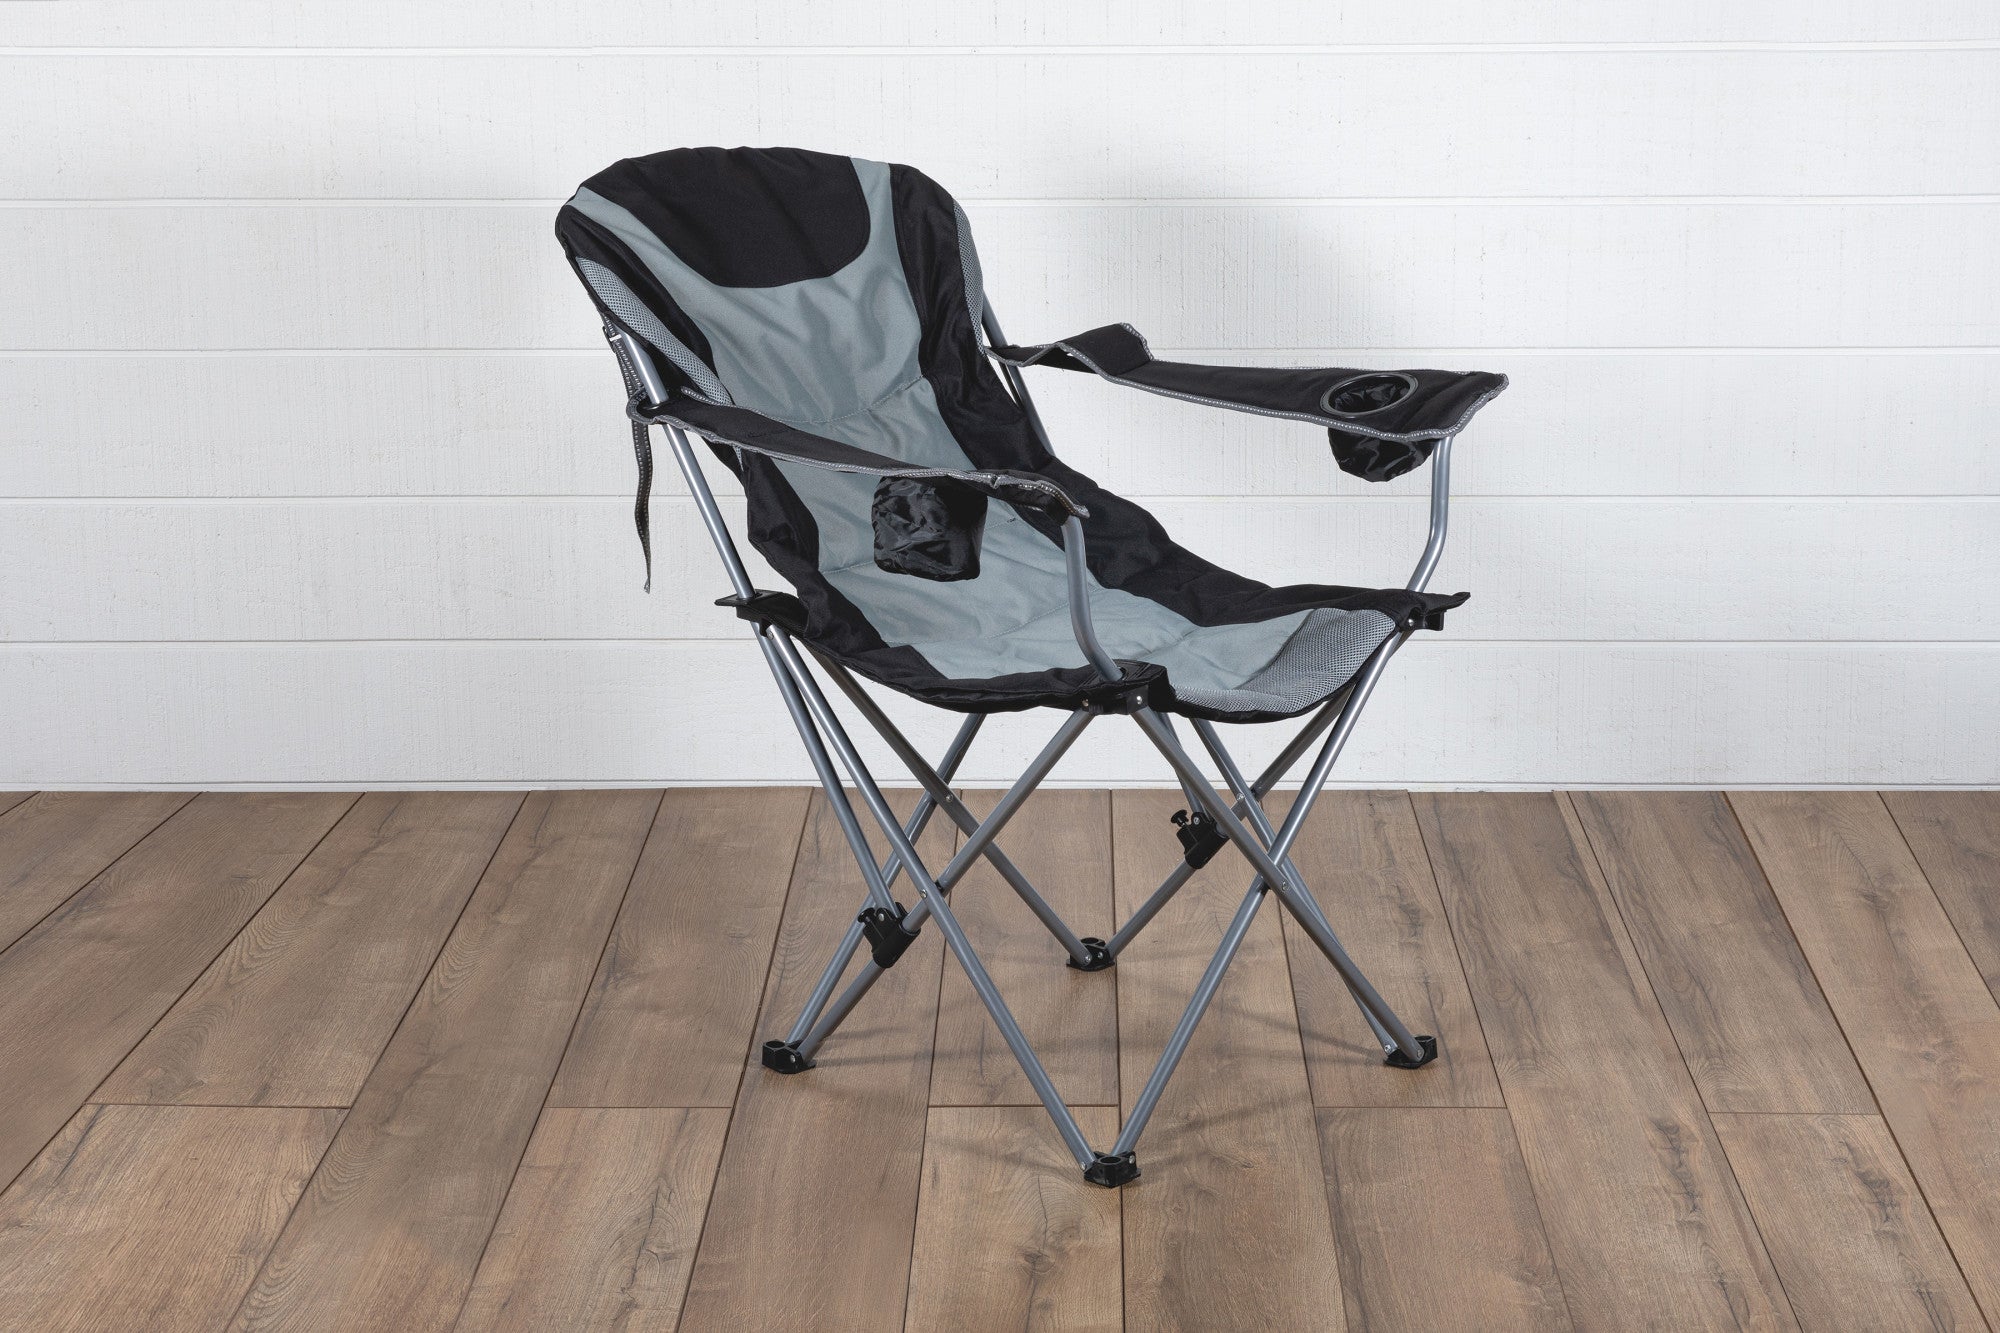 Oregon State Beavers - Reclining Camp Chair